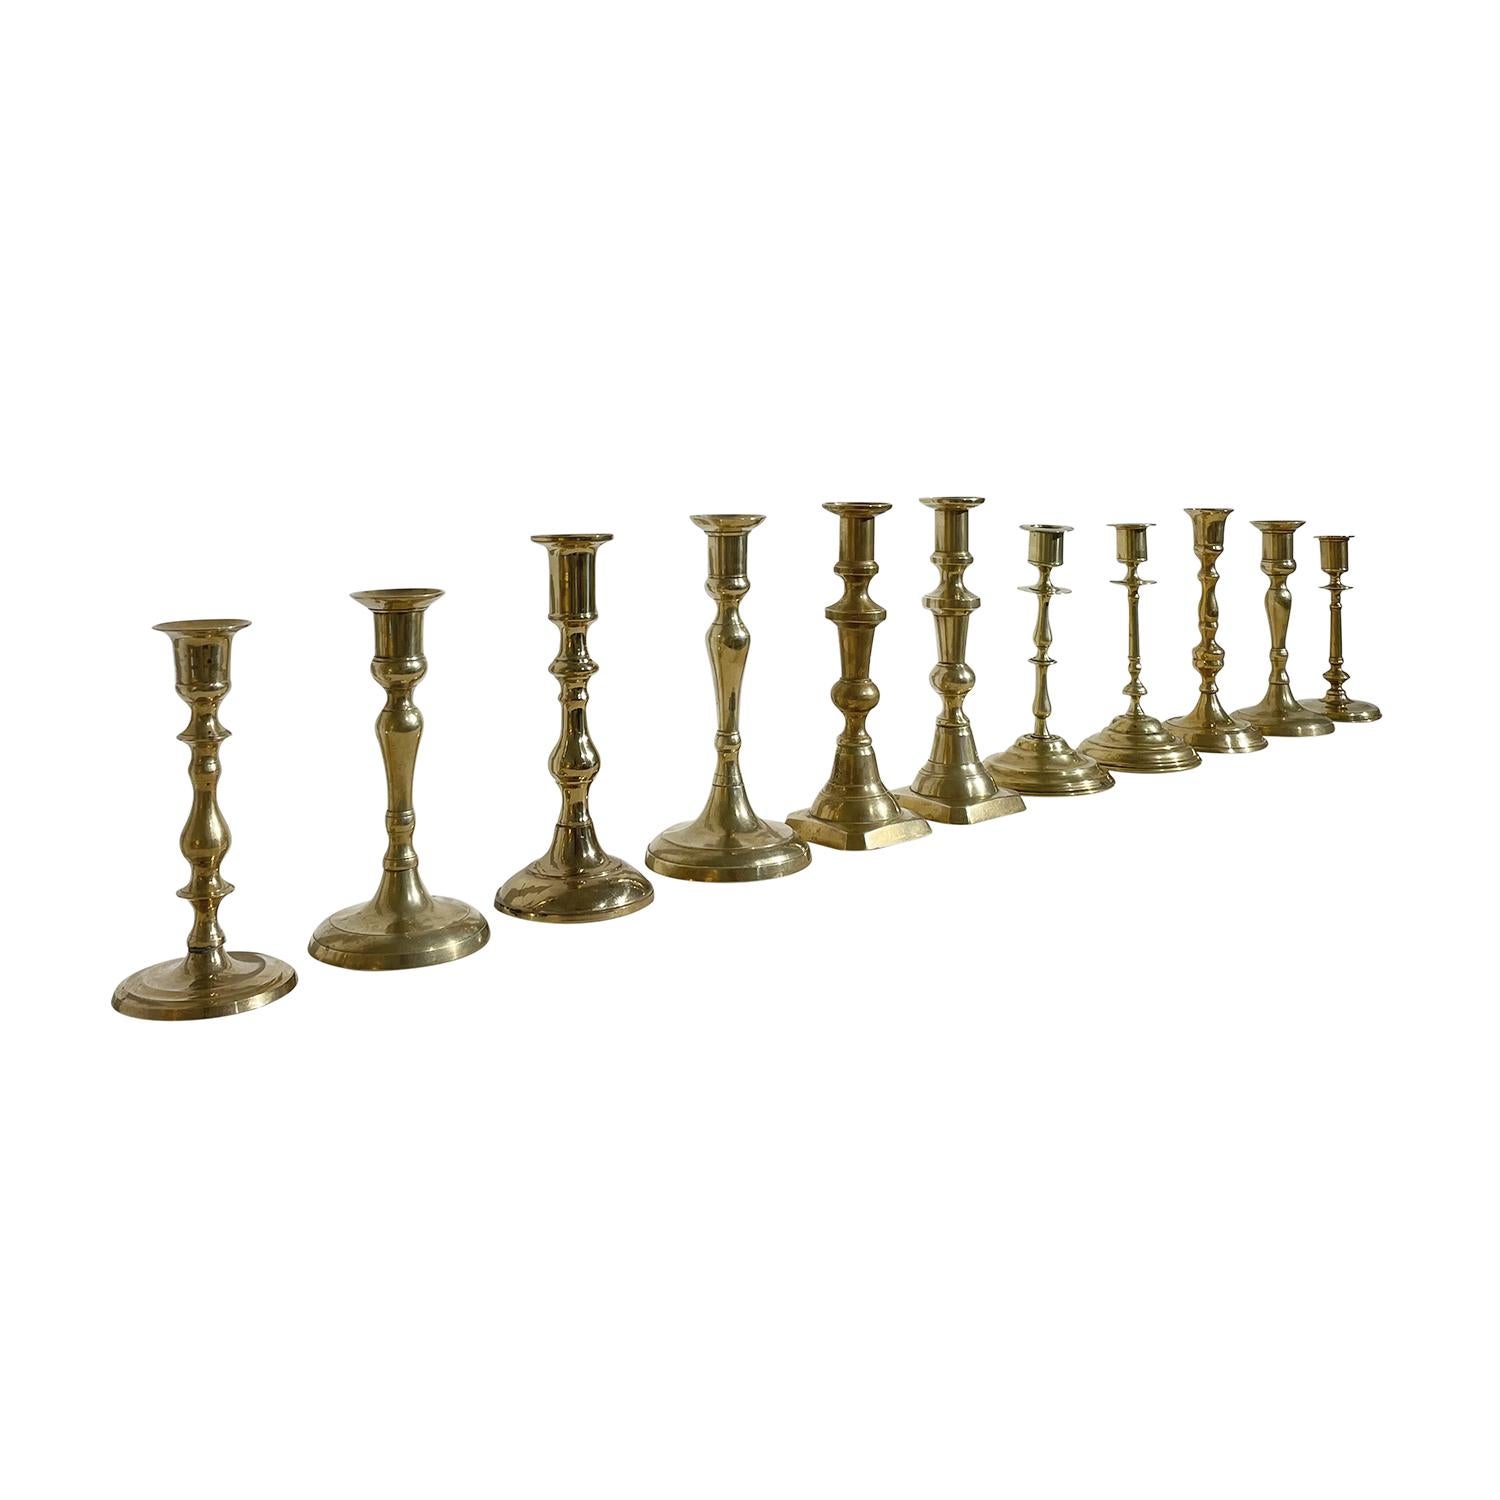 20th Century Gold Swedish Gustavian Similar Set of Eleven Brass Candle Holders In Good Condition For Sale In West Palm Beach, FL